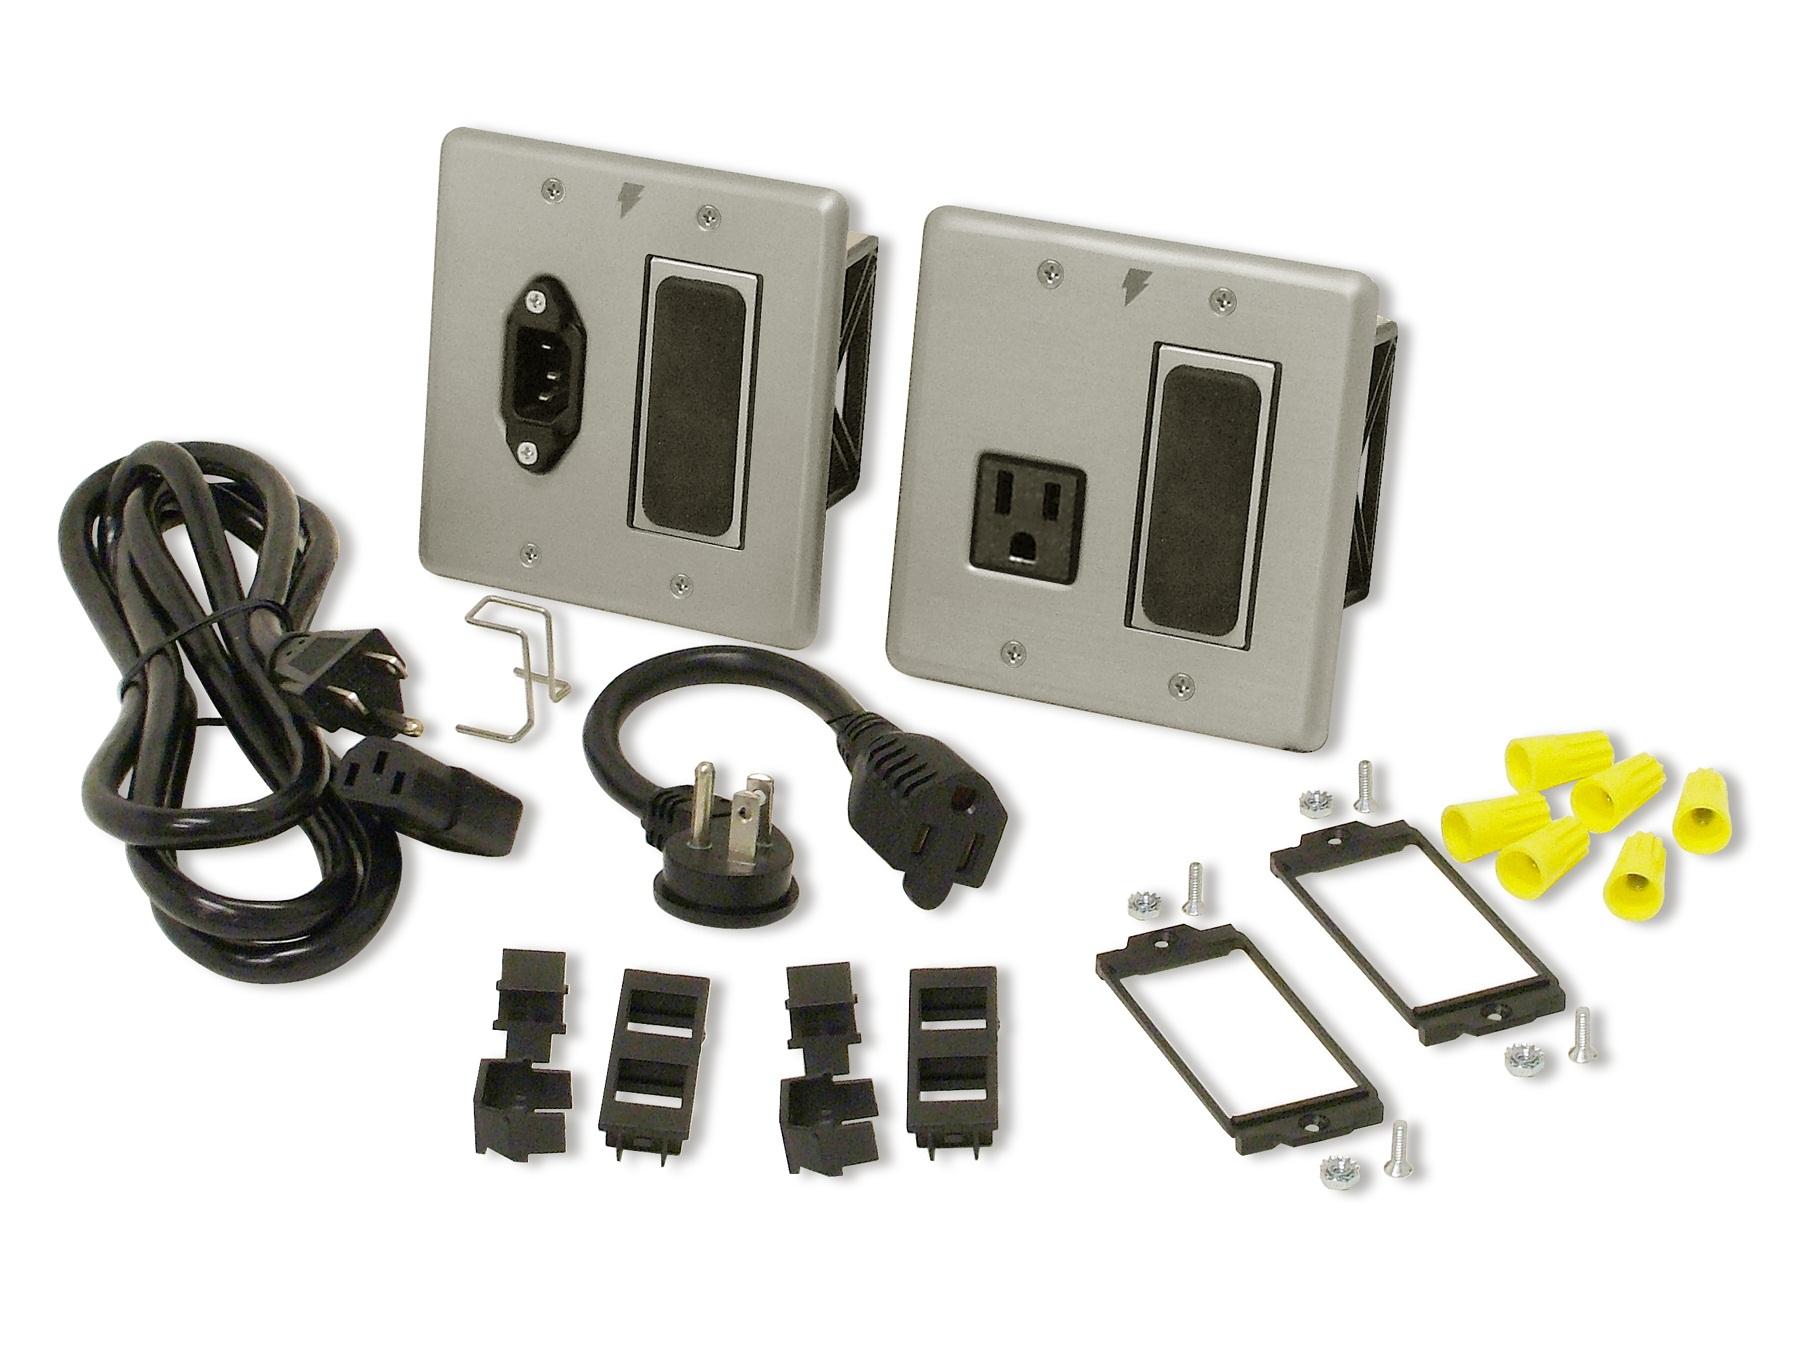 Panamax MIW-XT In-Wall Power Extender System